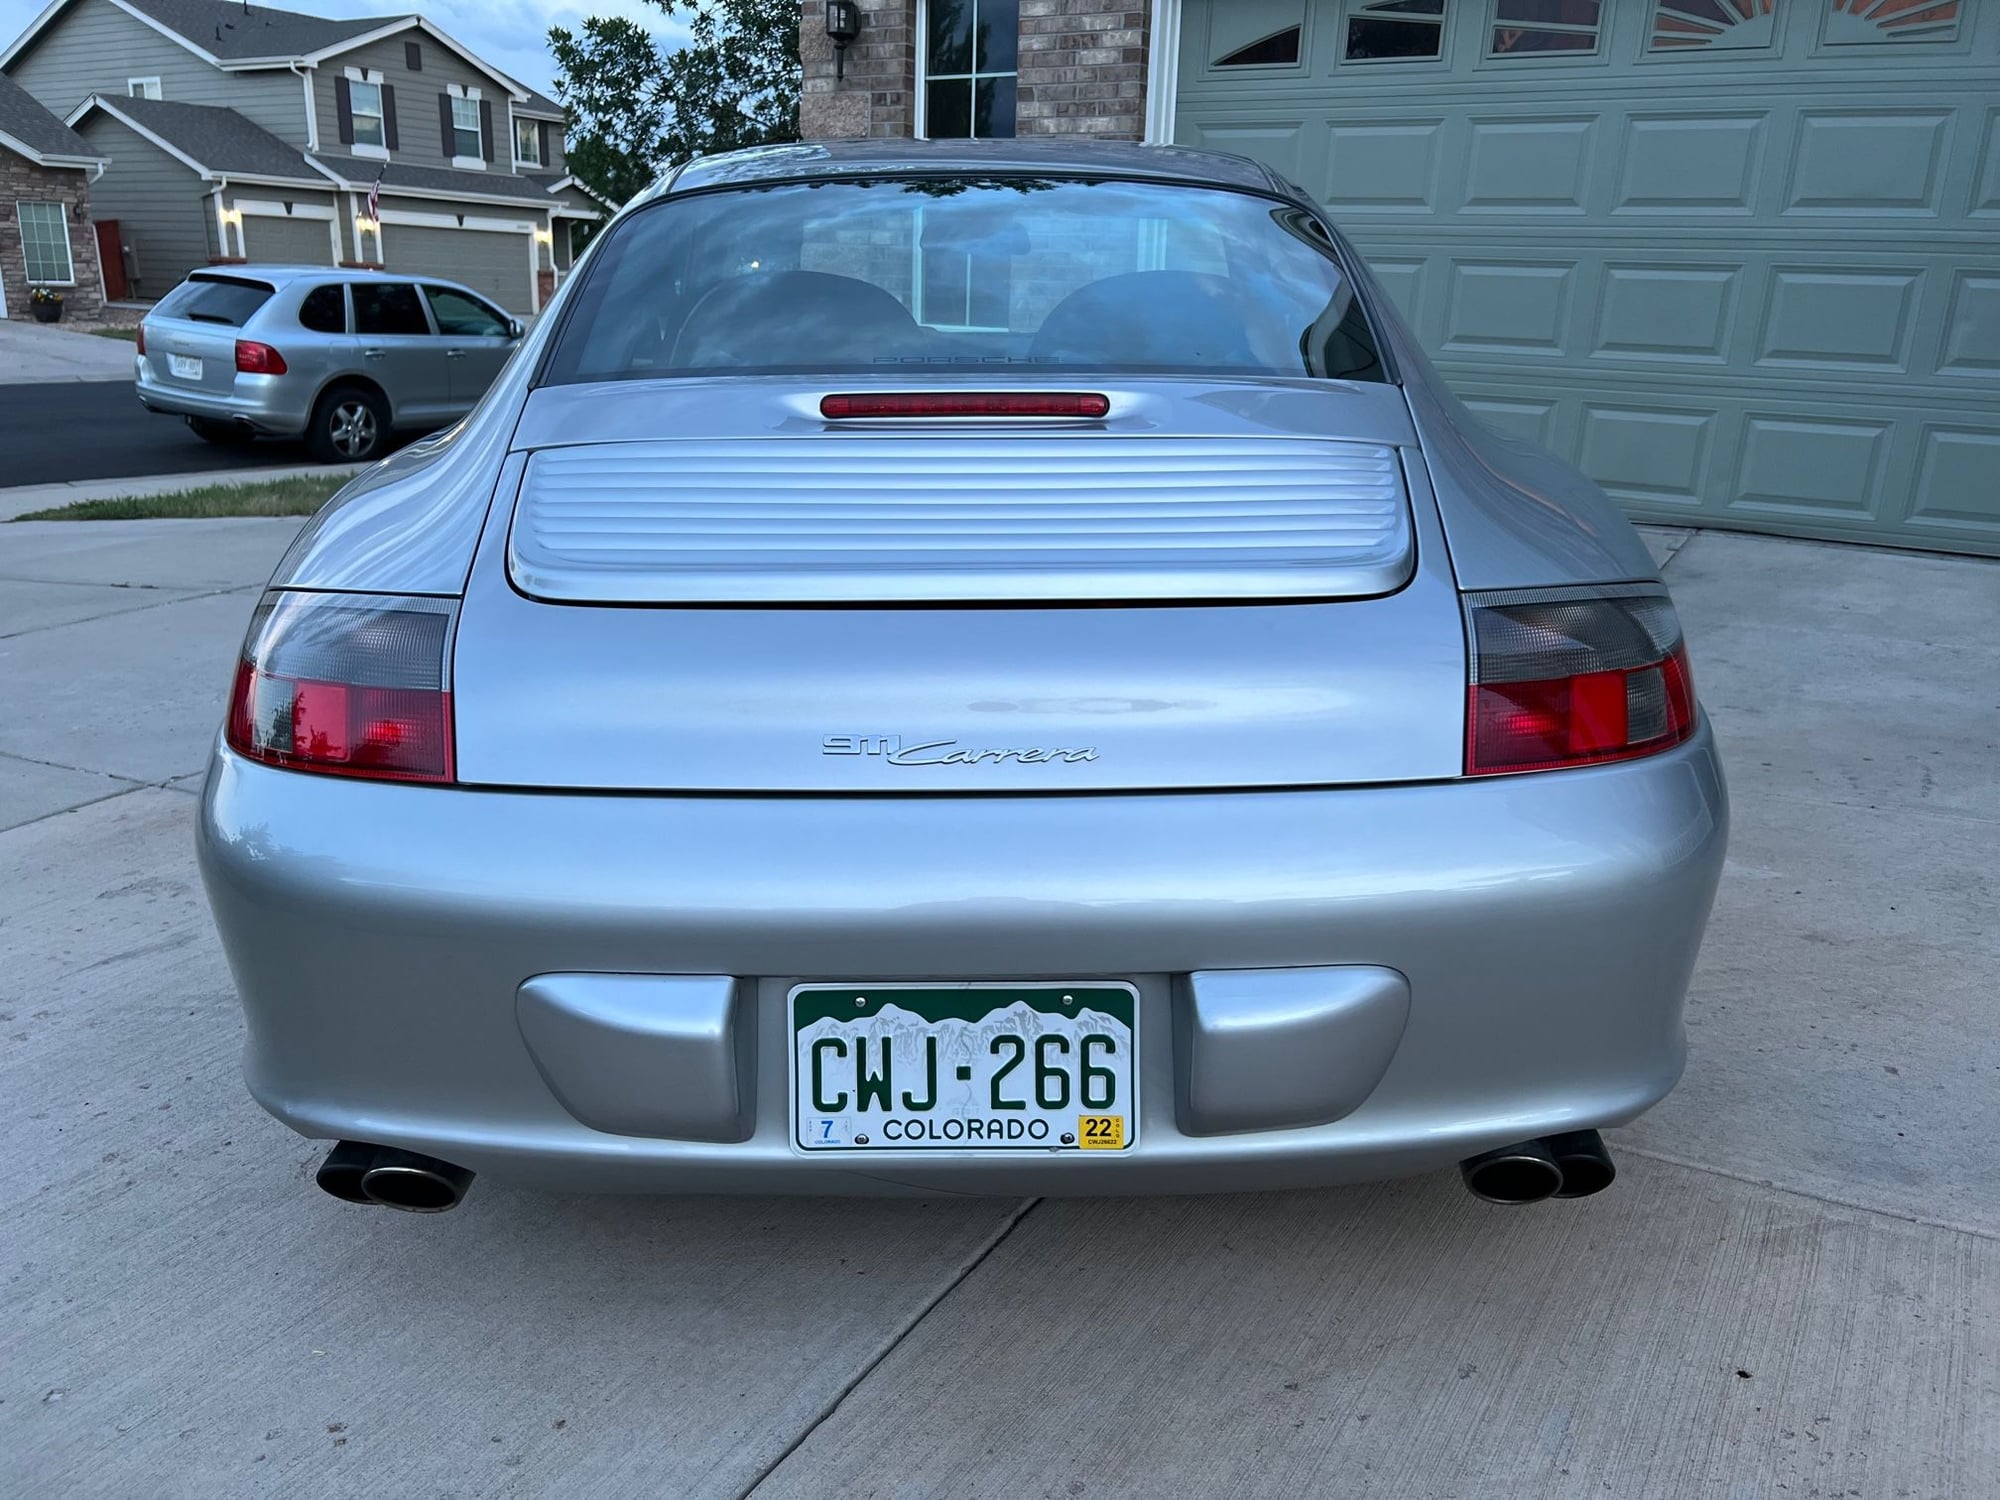 2002 Porsche 911 - 2002 Porsche 911 Carrera (996 C2) - Used - VIN WP0AA29902S621440 - 66,297 Miles - 6 cyl - 2WD - Manual - Coupe - Silver - Parker, CO 80134, United States